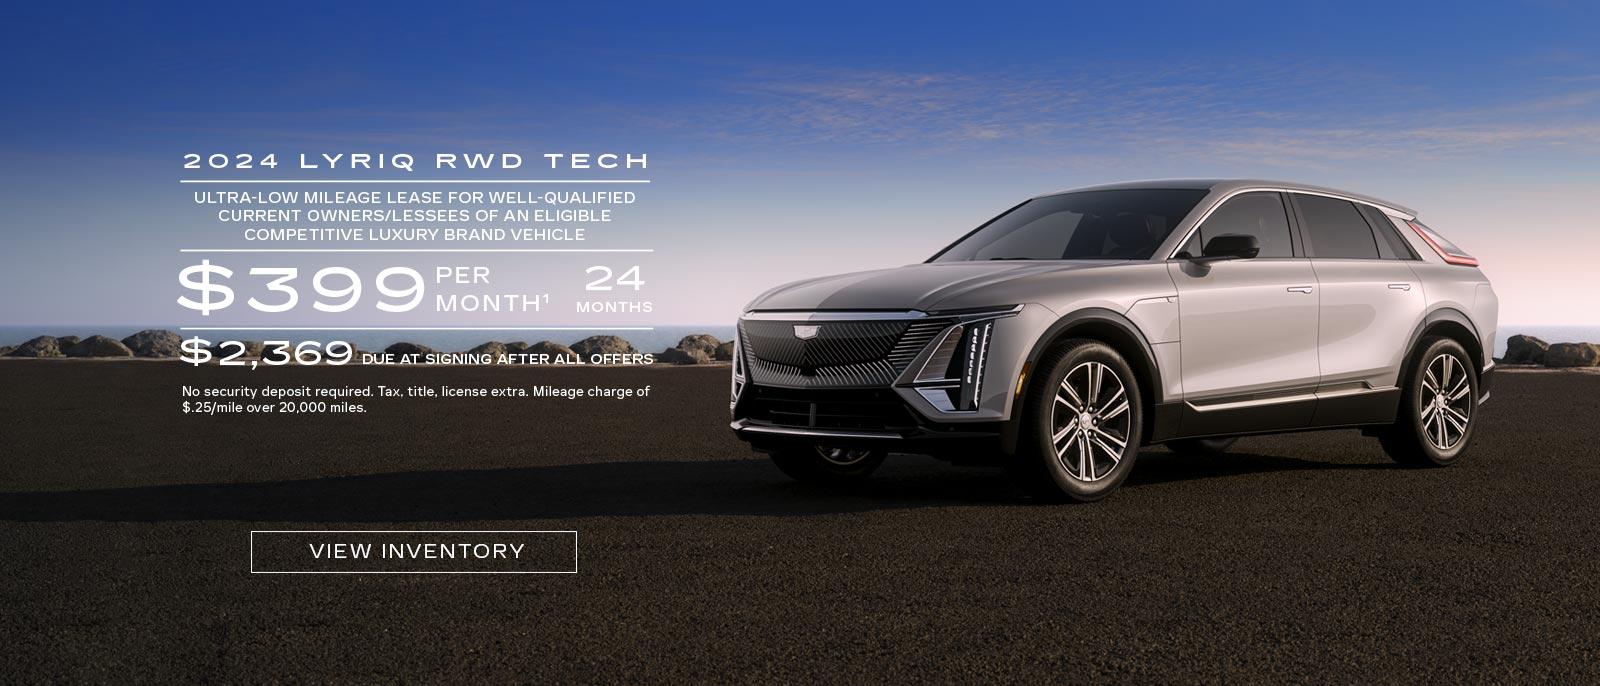 2024 LYRIQ RWD Tech 1. Ultra-low mileage lease for well-qualified current eligible Cadillac lessees. $399 per month. 24 months. $2,369 due at signing after all offers.